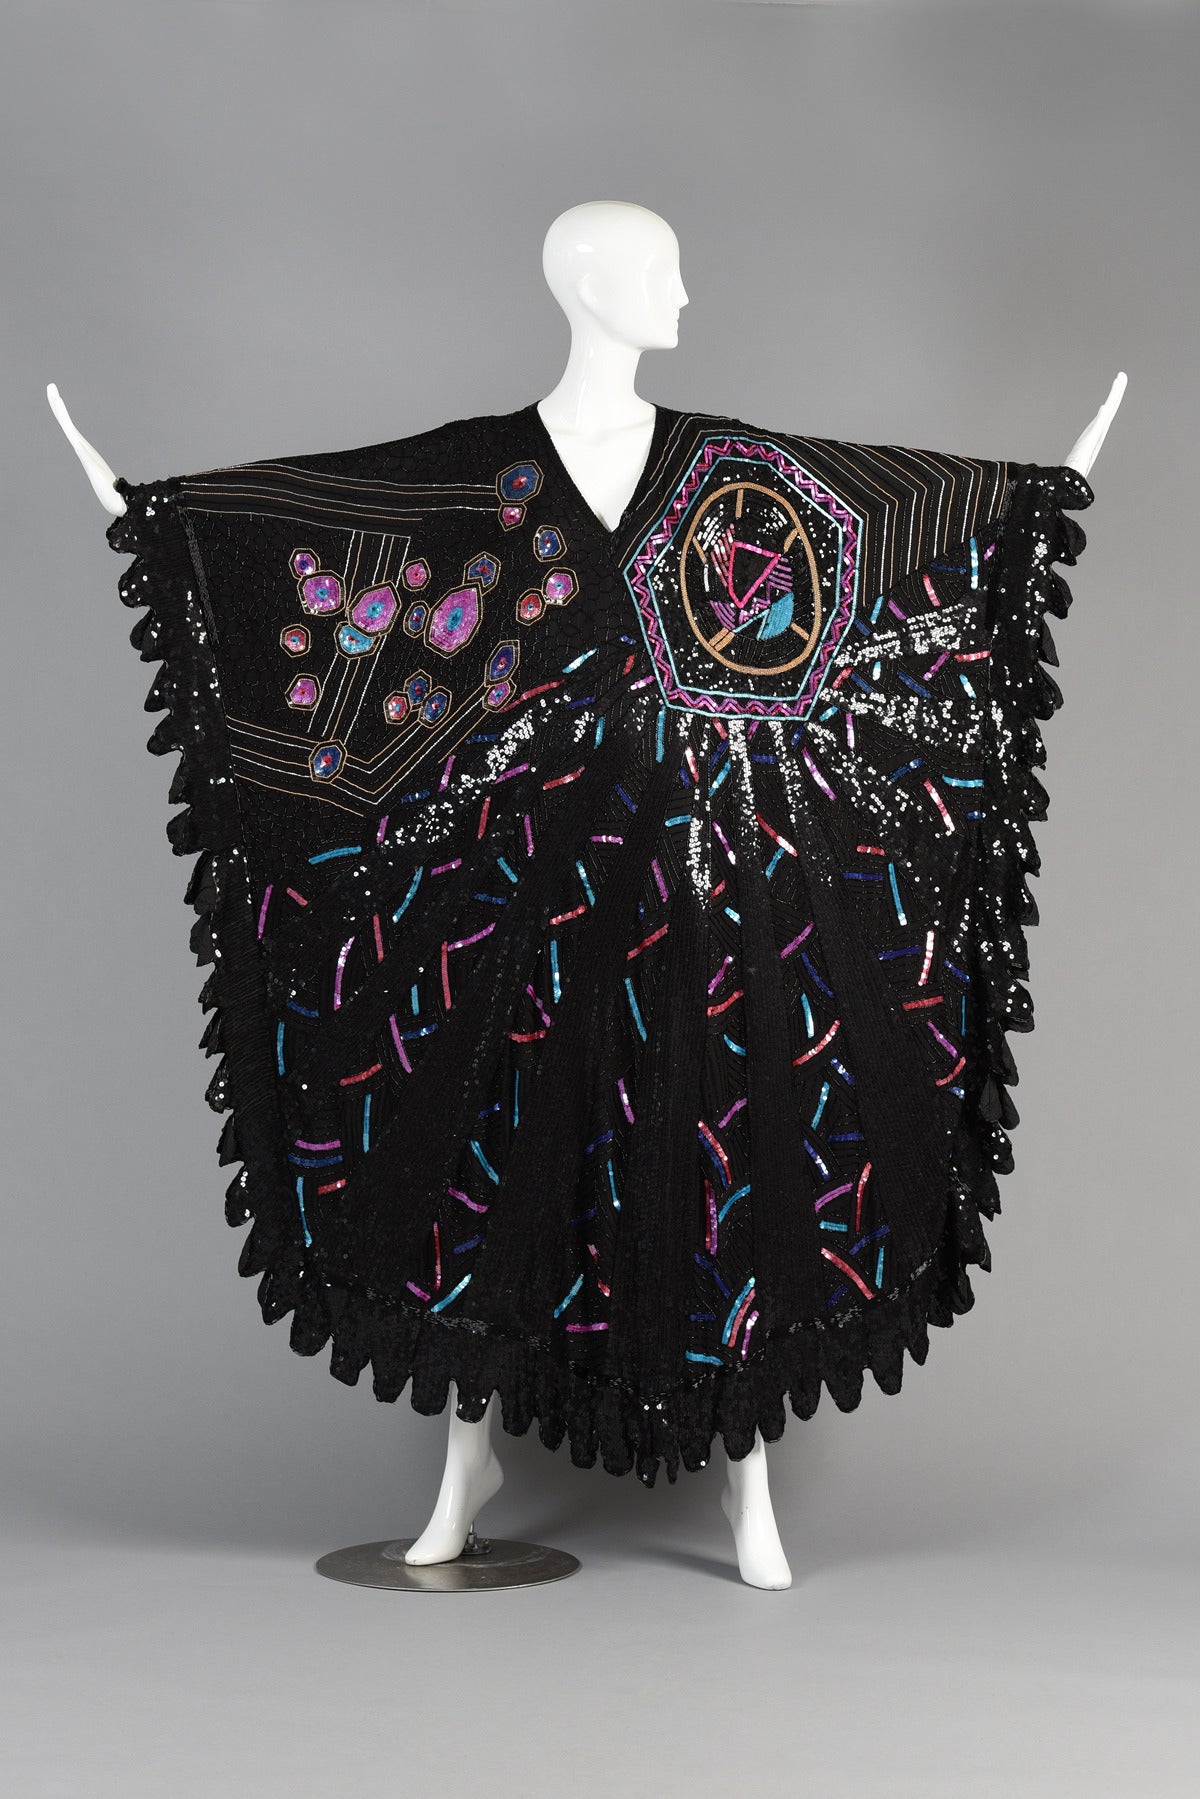 Incredible 1980's sequin encrusted silk caftan. An absolutely AMAZING piece! All black sequin body with v-neck and scalloped edges. Killer graphic sunburst pattern! Excellent vintage condition

One size fits most. Due to its oversized nature and